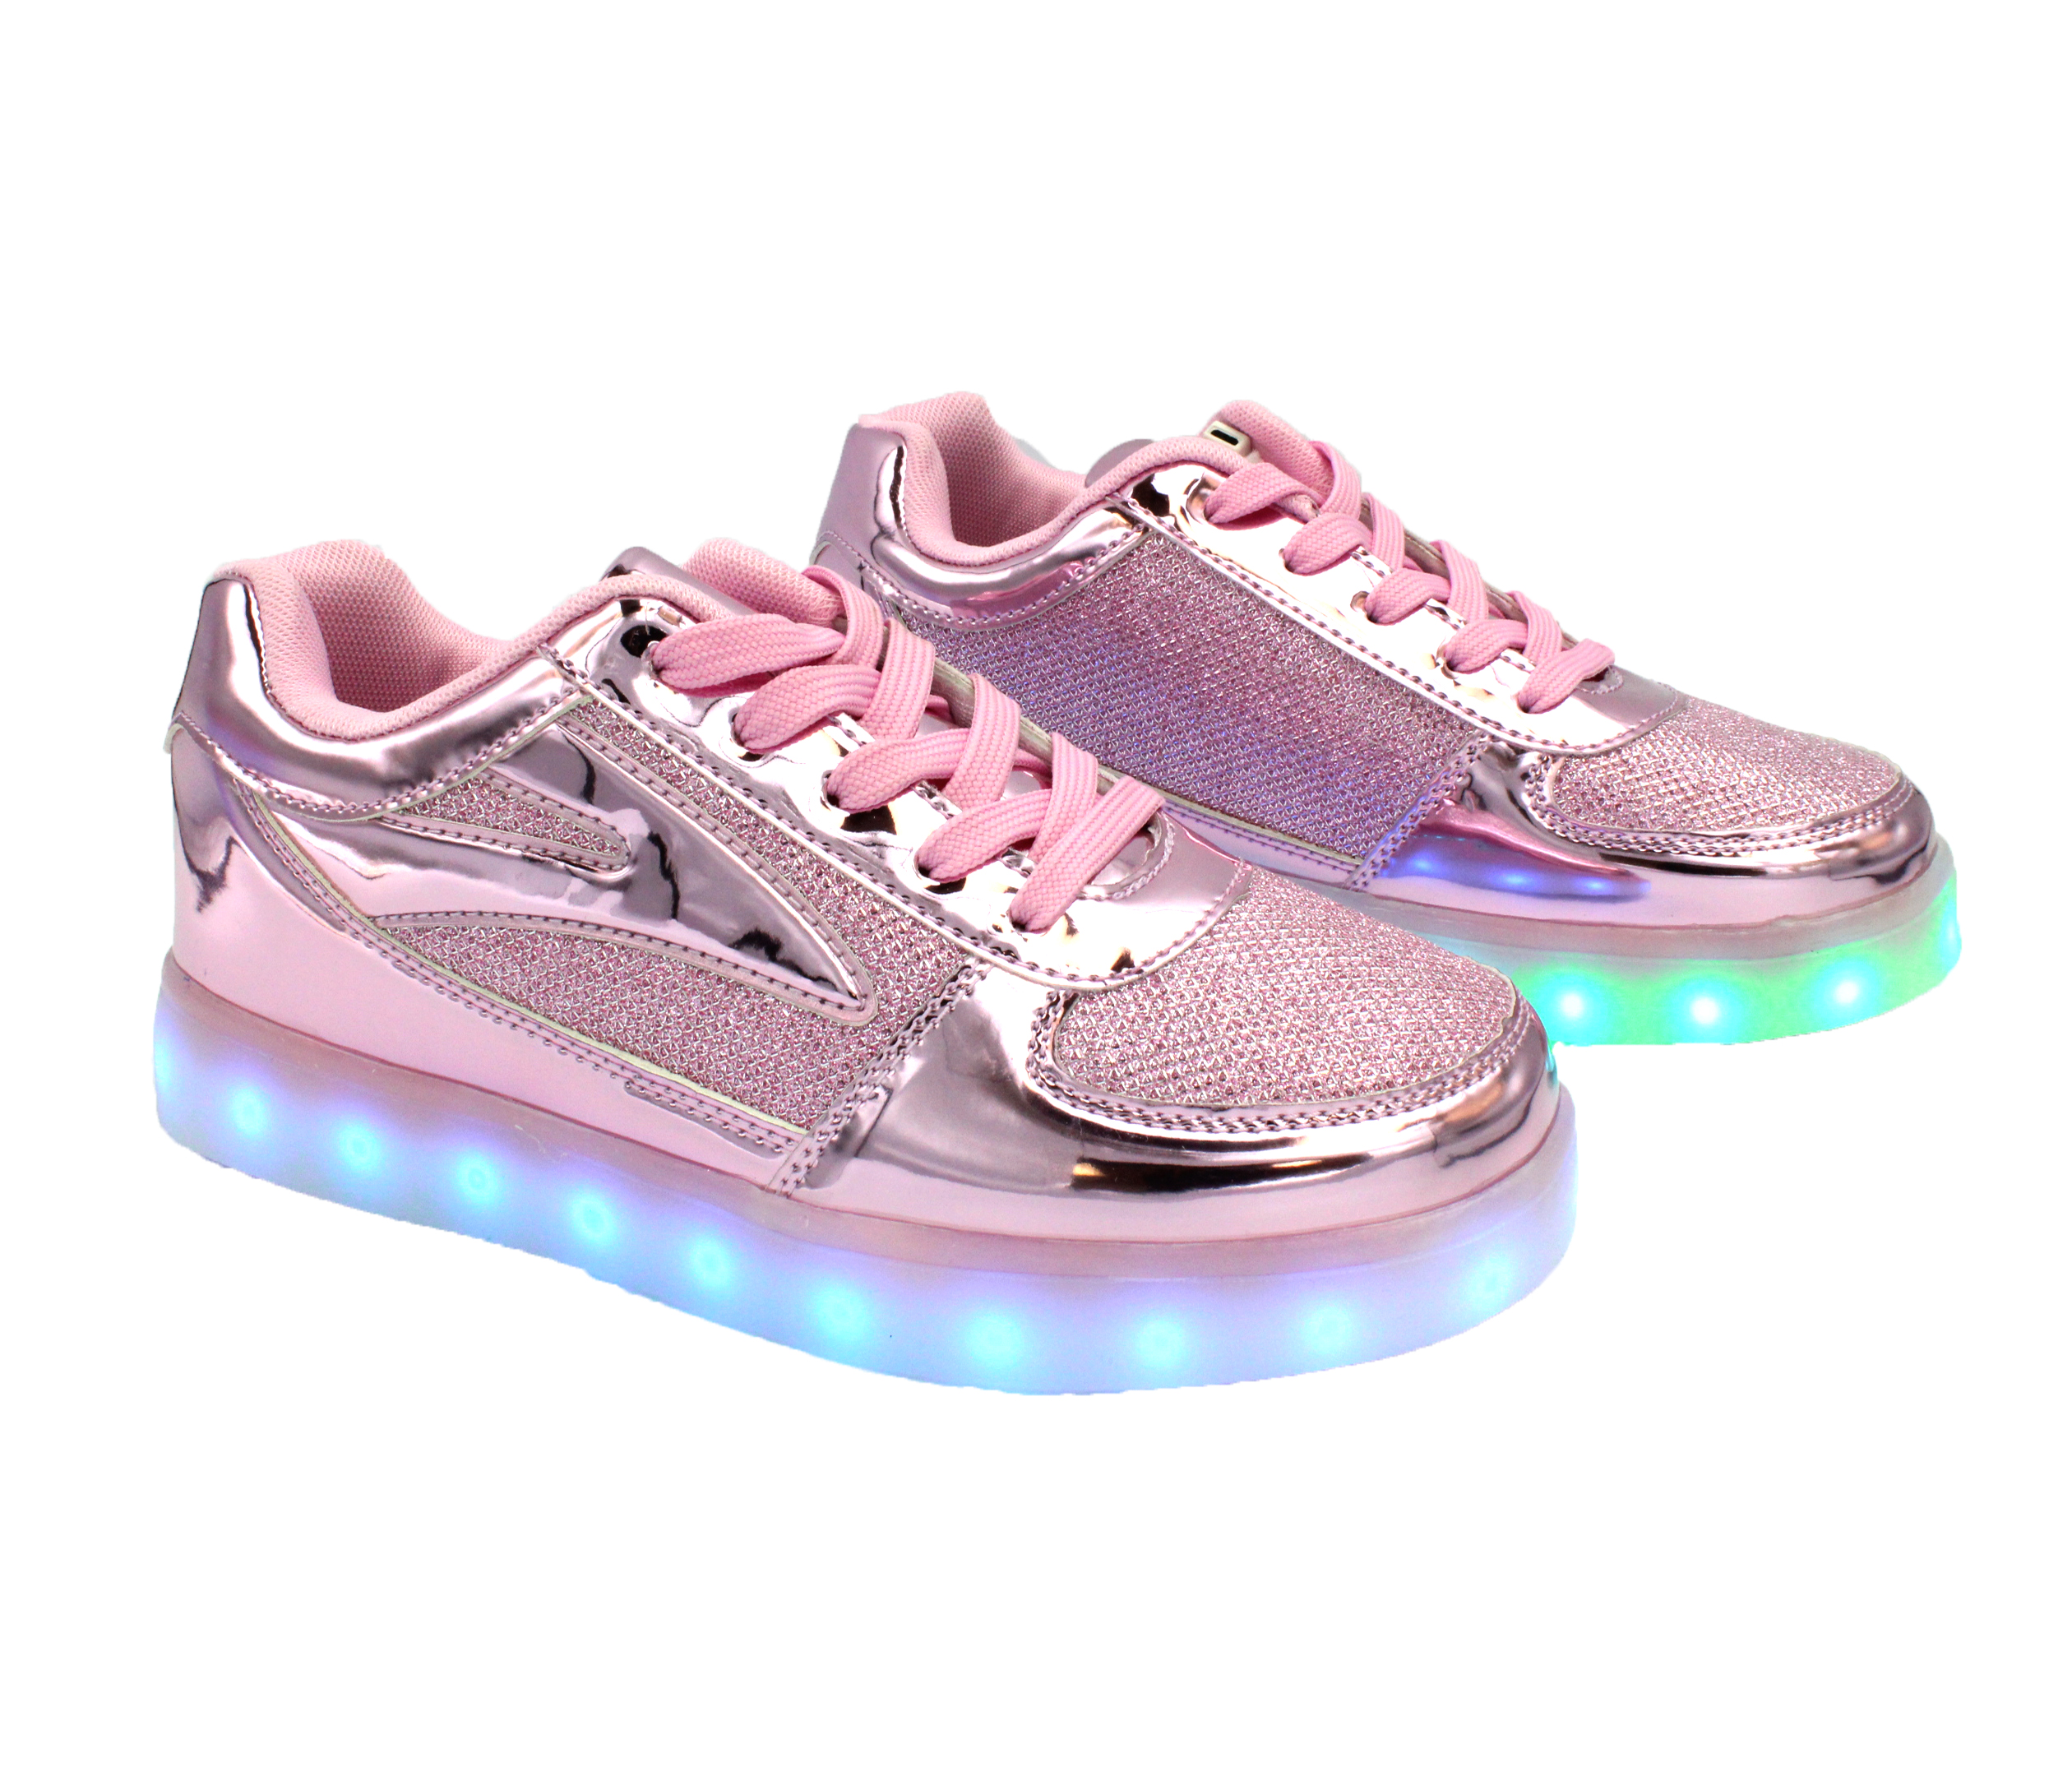 Galaxy LED Shoes Light Up USB Charging Low Top Women's Sneakers ...